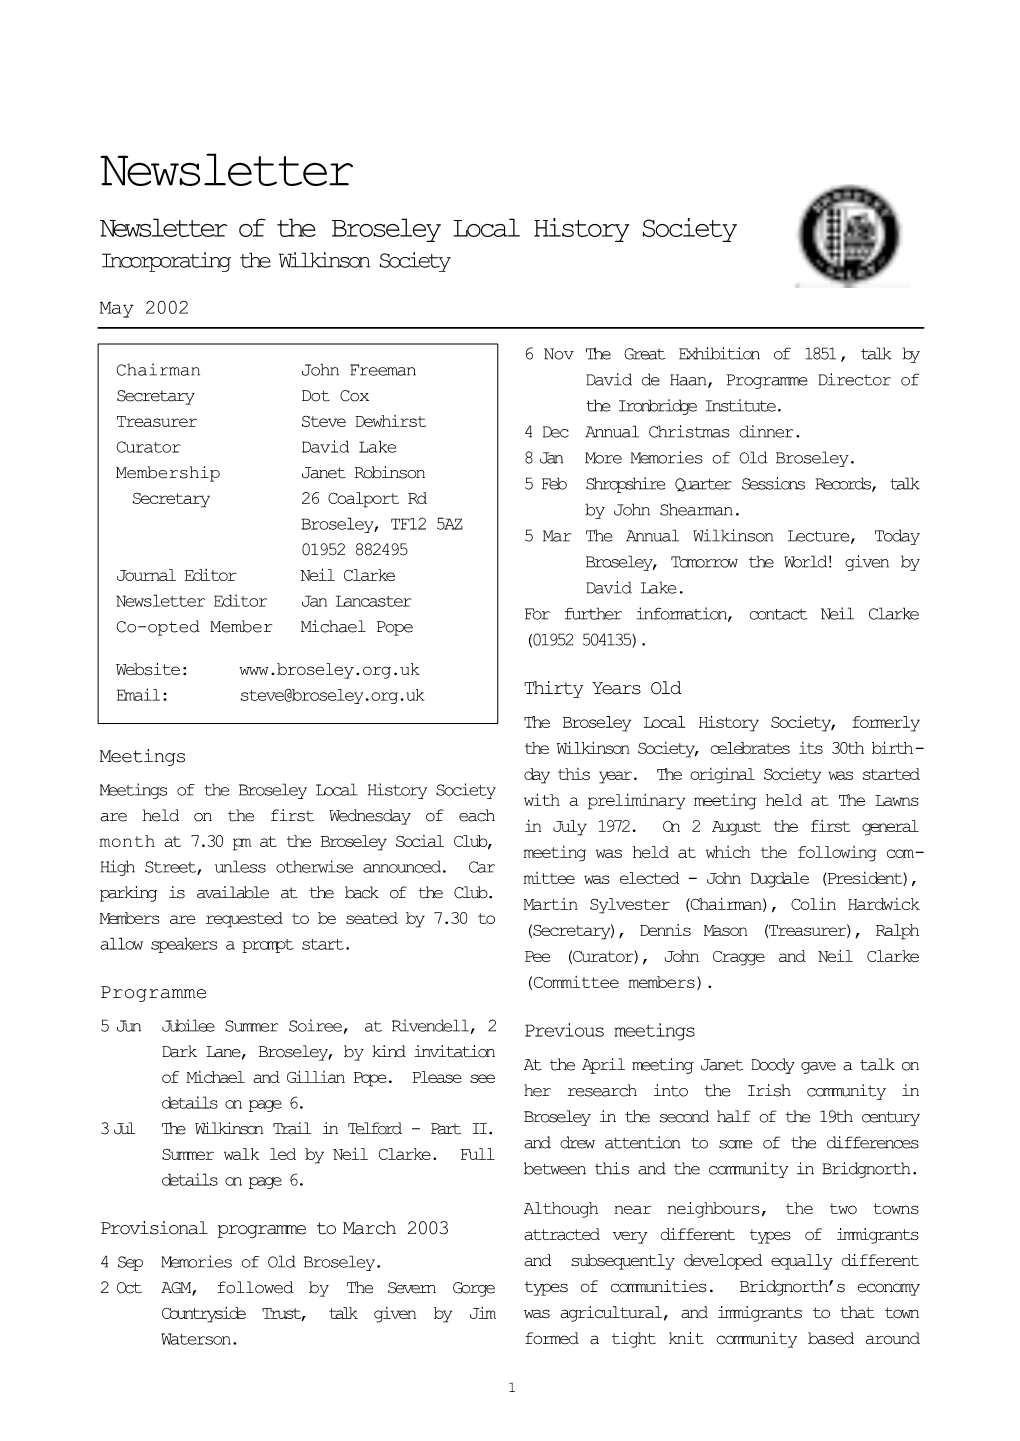 Newsletter Newsletter of the Broseley Local History Society Incorporating the Wilkinson Society